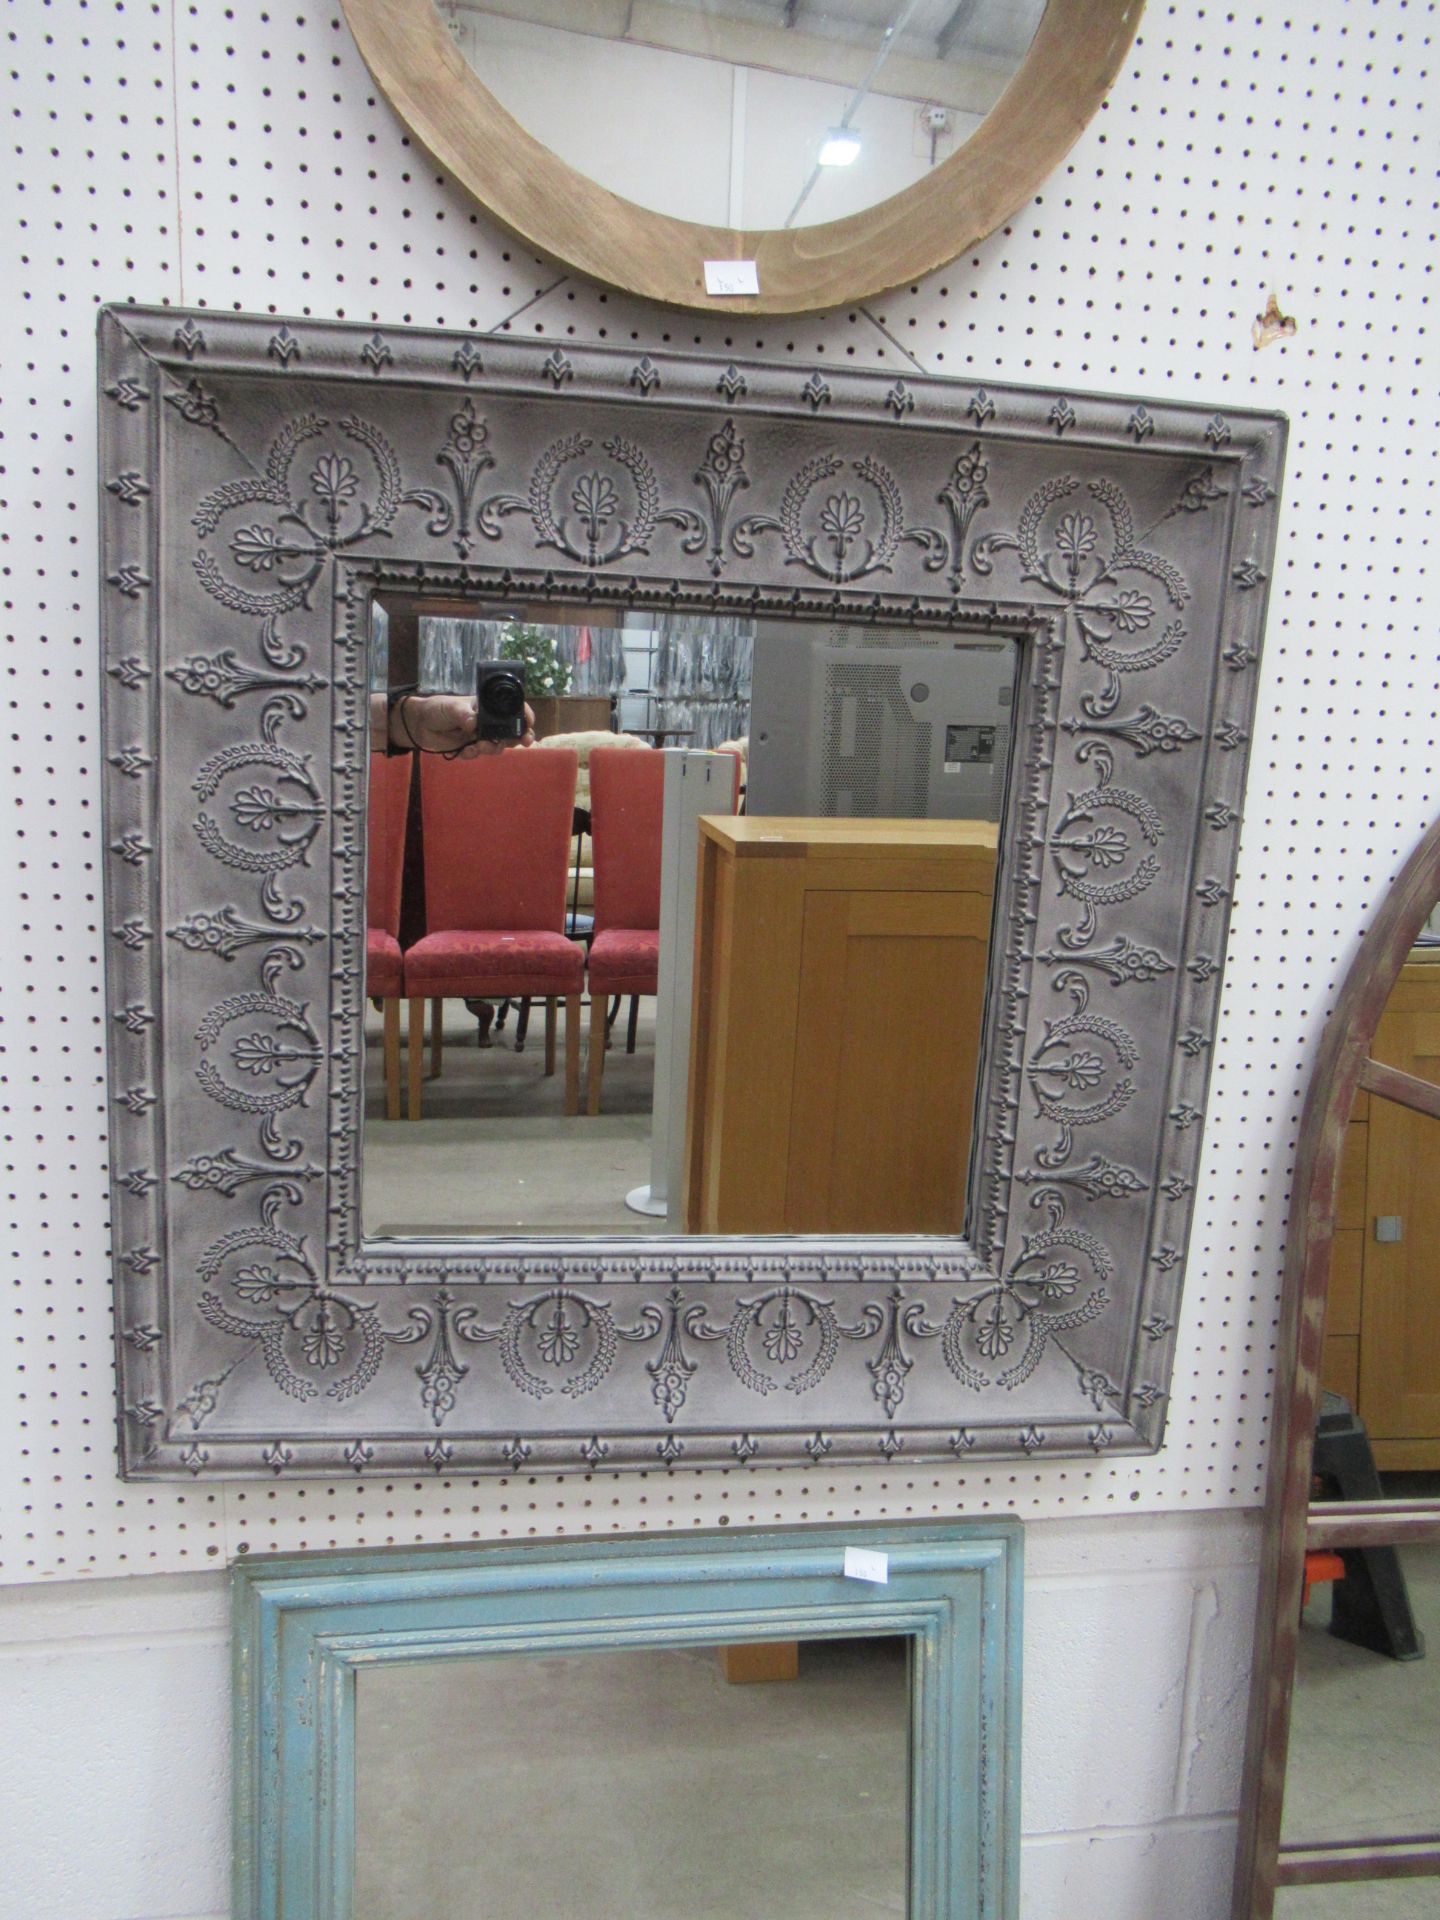 3x wall hanging mirrors - Image 3 of 4